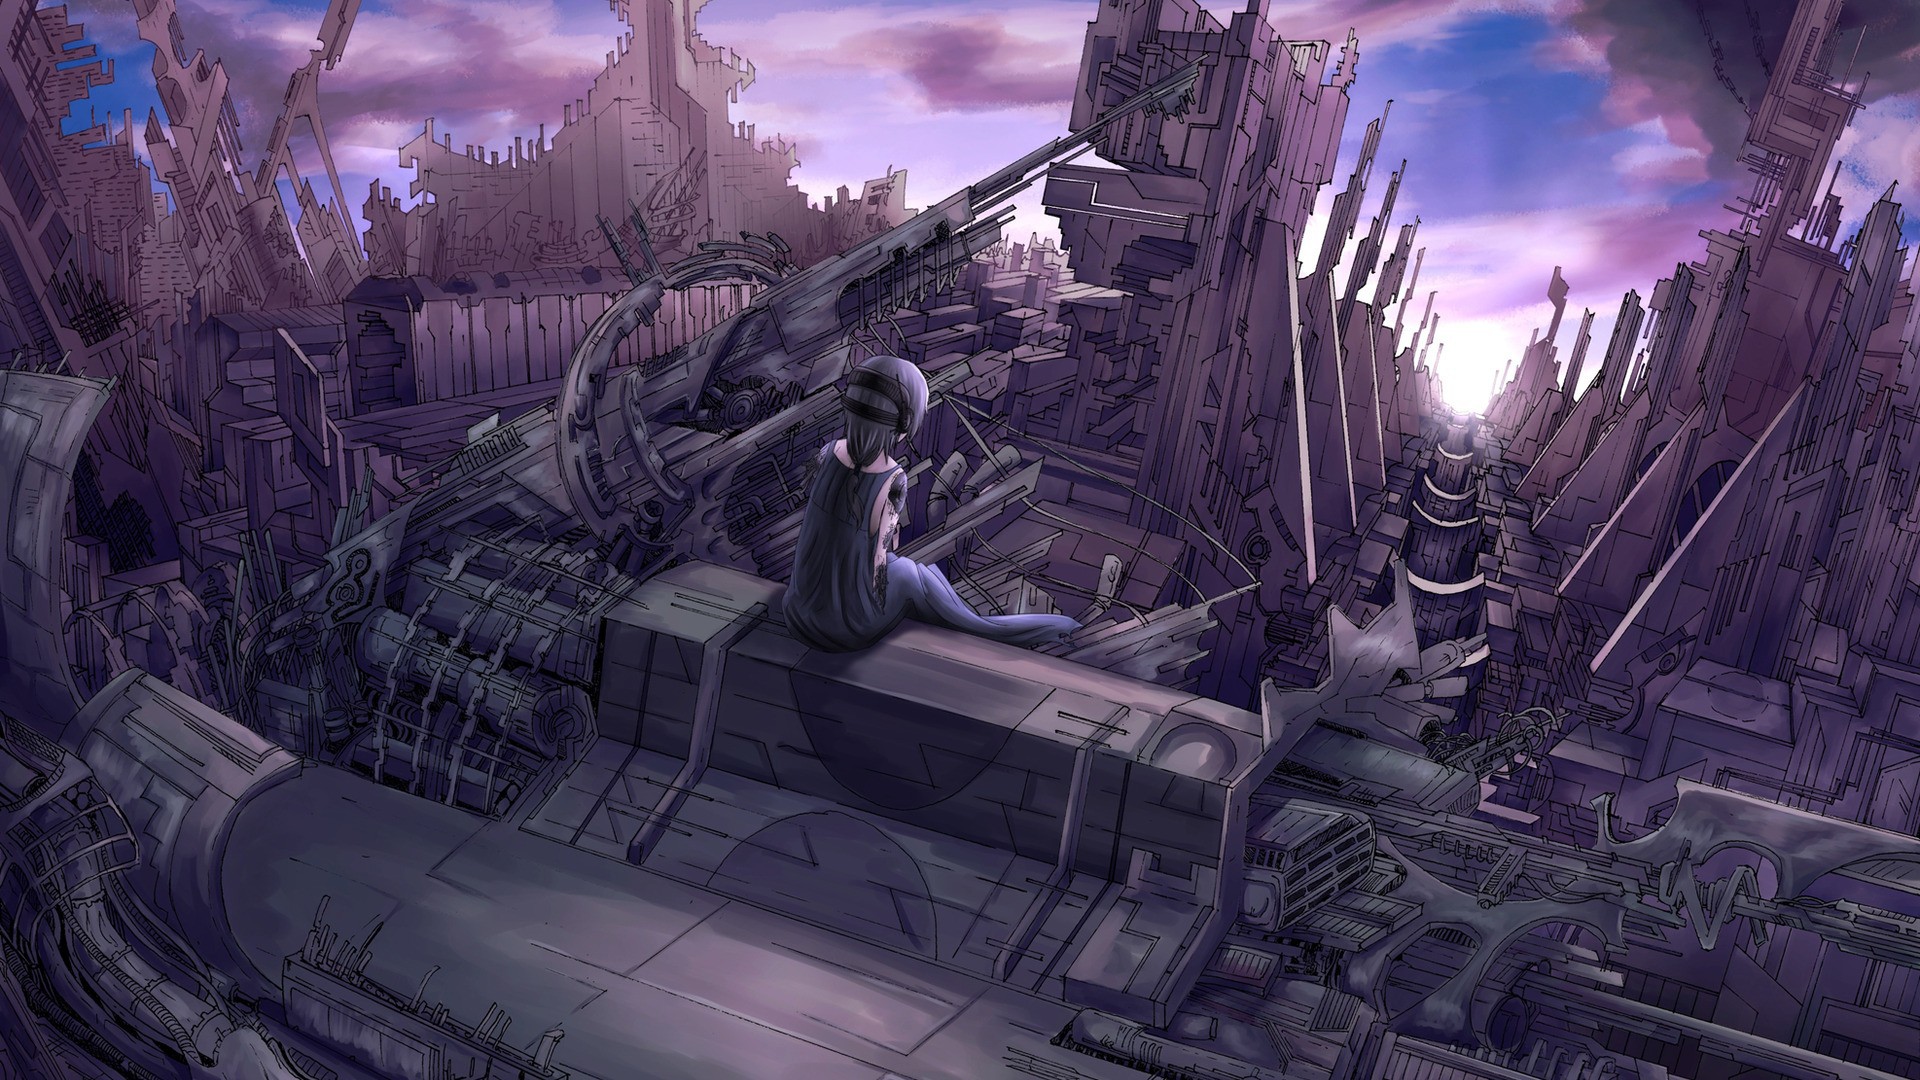 { Awakening : Abyssal Wonder ~ Water Ways of the Bay } Anime_Anime_girl_looks_at_the_ruins_of_the_city_099724_